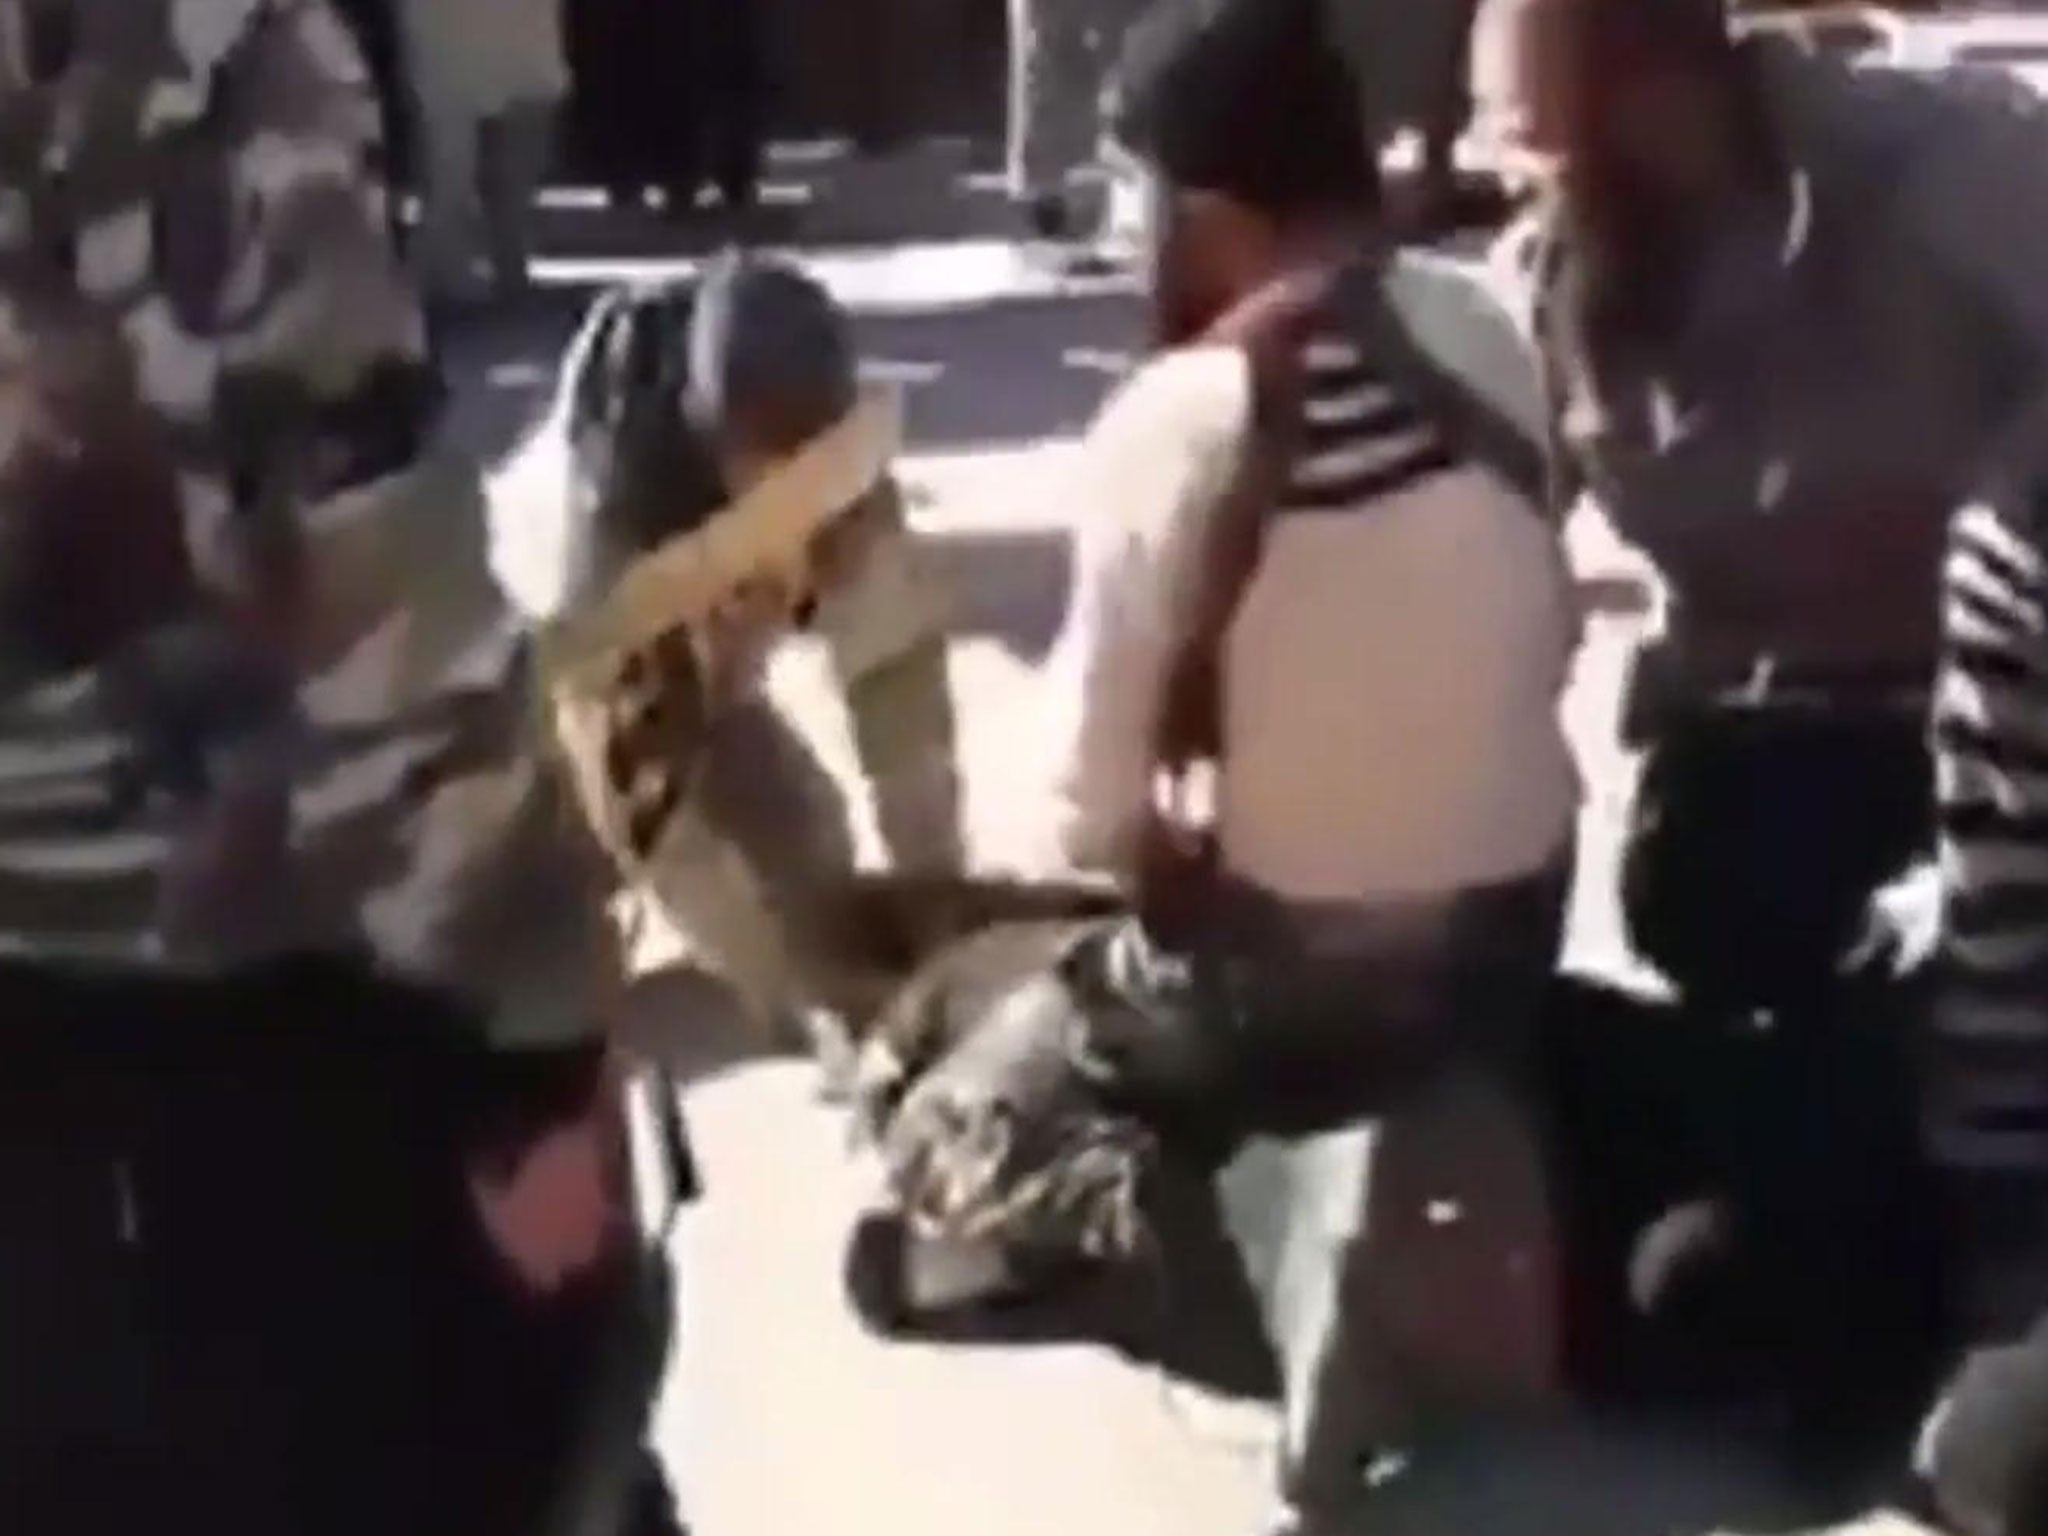 The man continued to struggle up until his death at the hands of Isis in Al-Shadadi, Syria